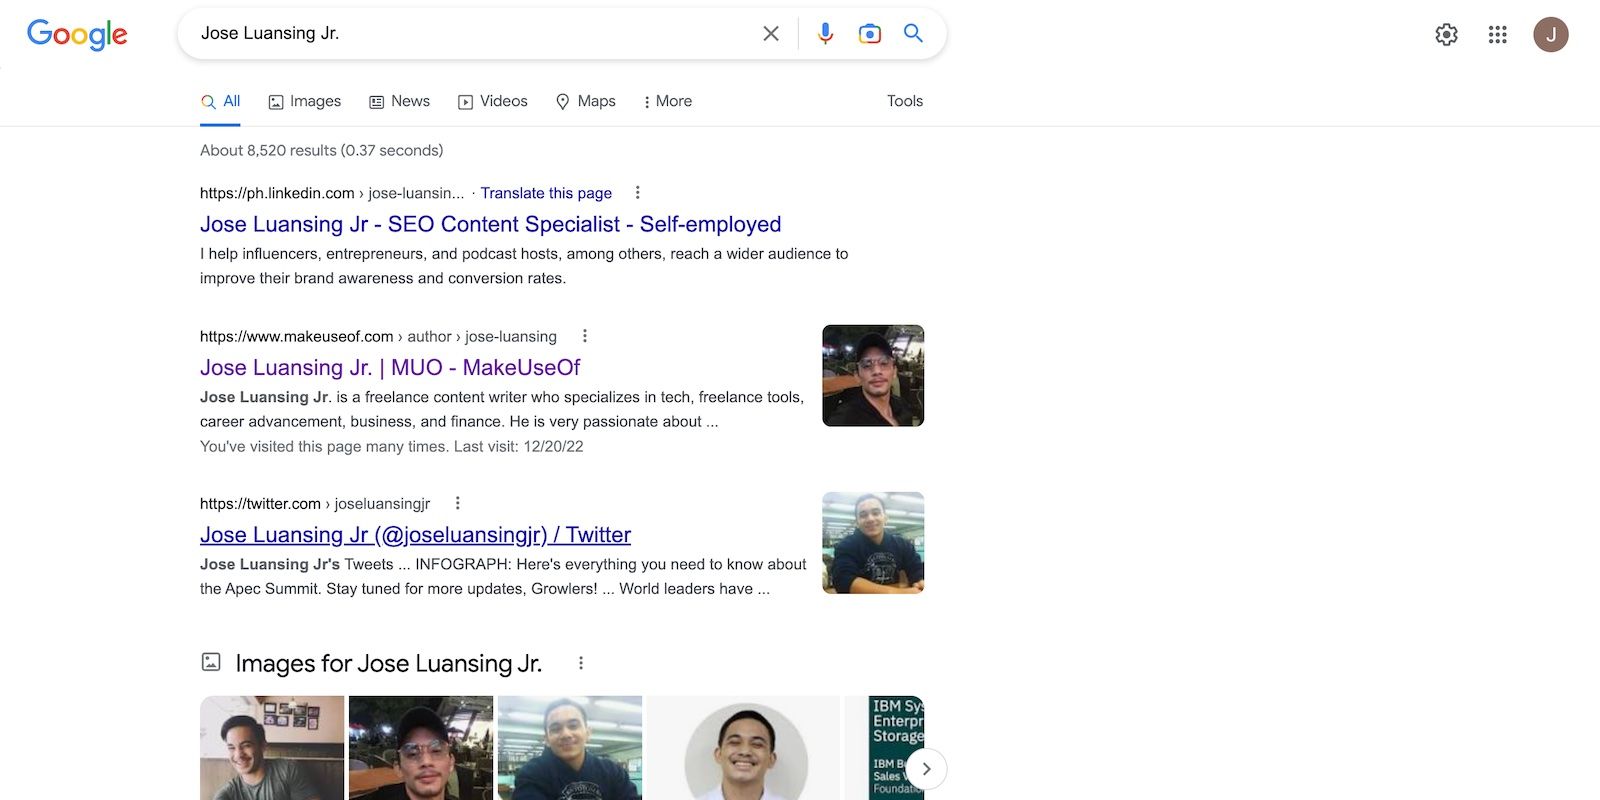 The Google Search Results for Jose Luansing Jr.